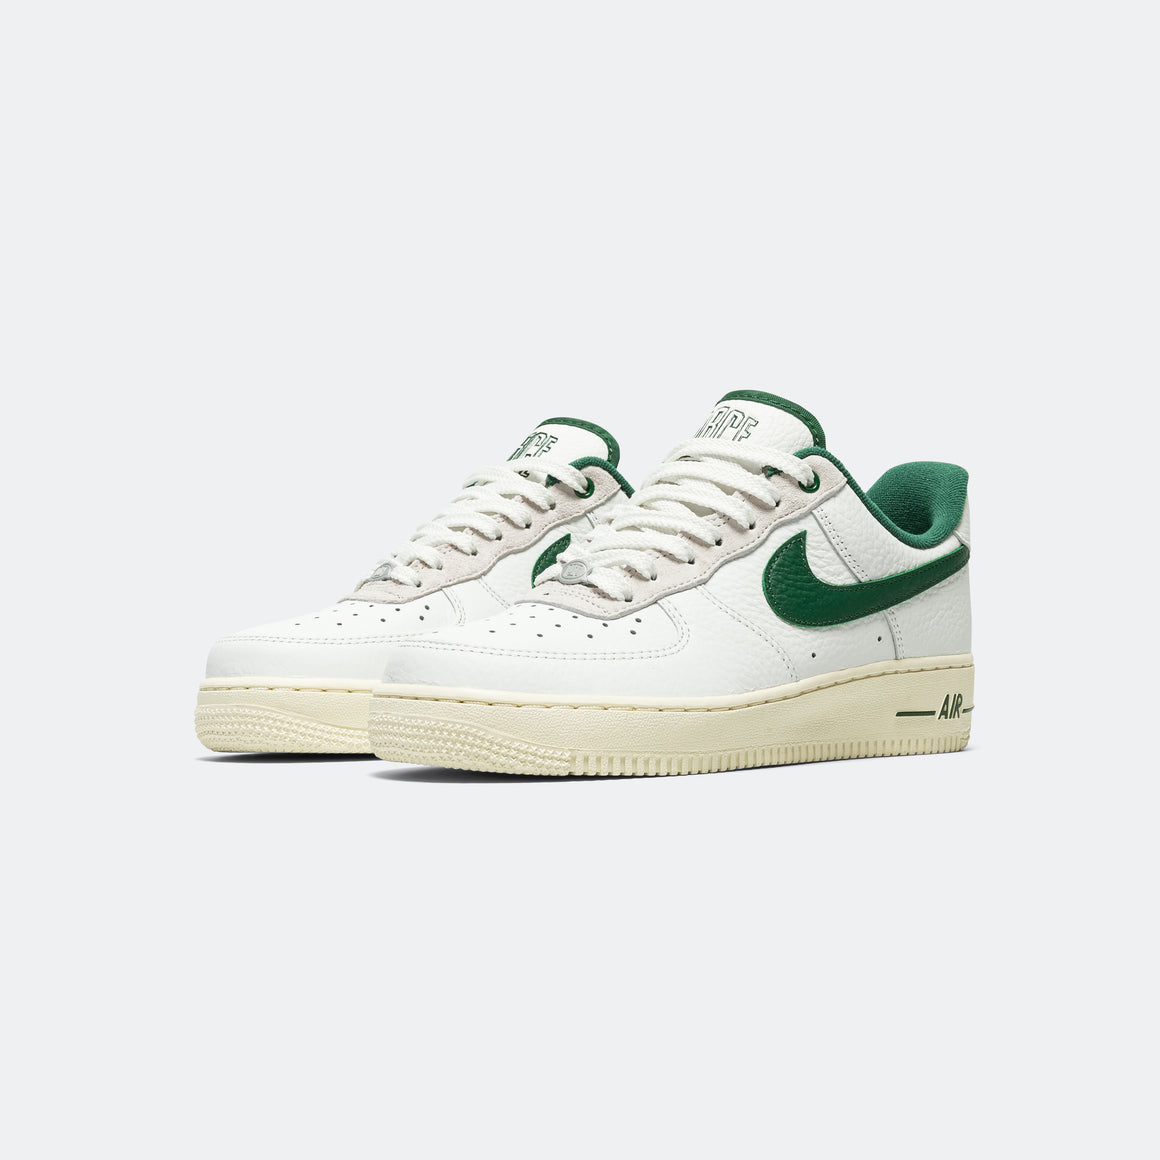 Nike - Womens Air Force 1 '07 LX - Summit White/Gorge Green-White - UP THERE